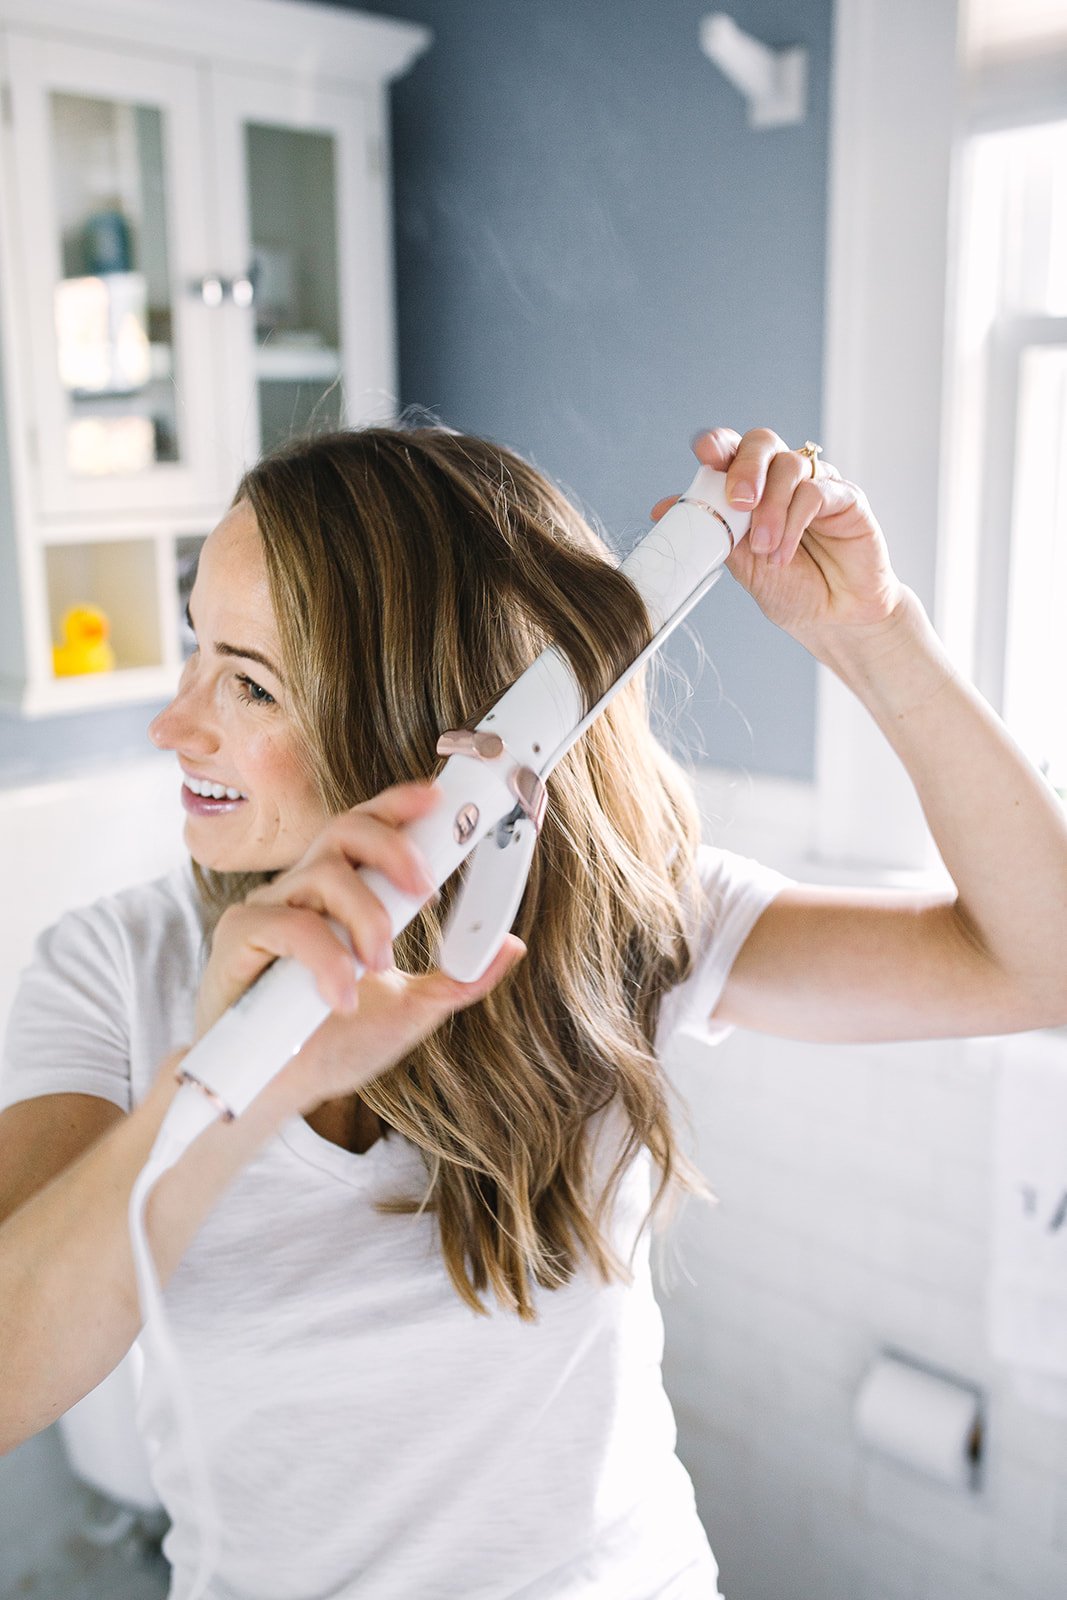 How to use a curling iron